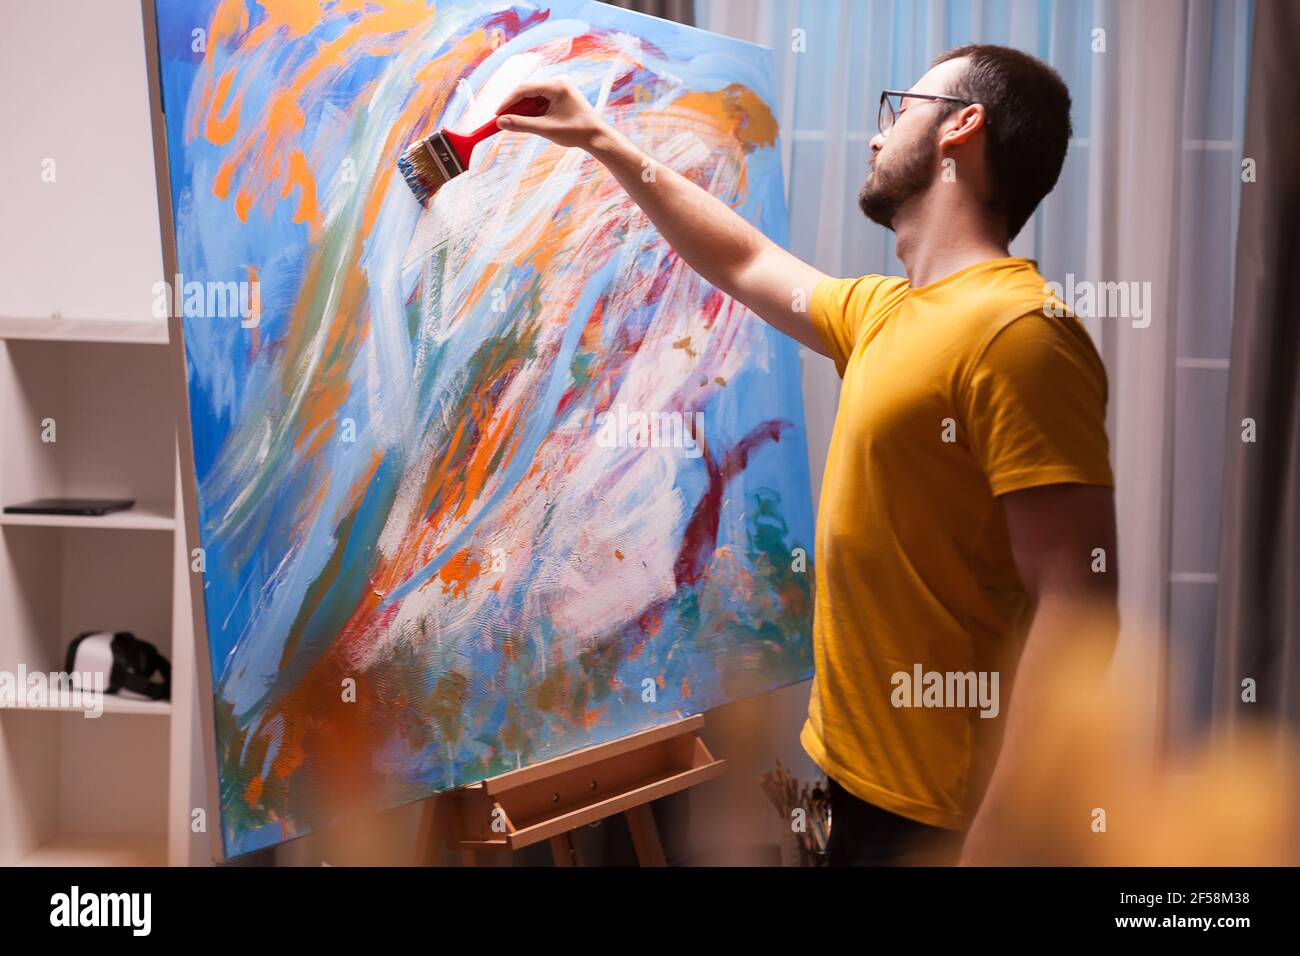 Man painting a masterpiece on large canvas in art studio. Modern ...